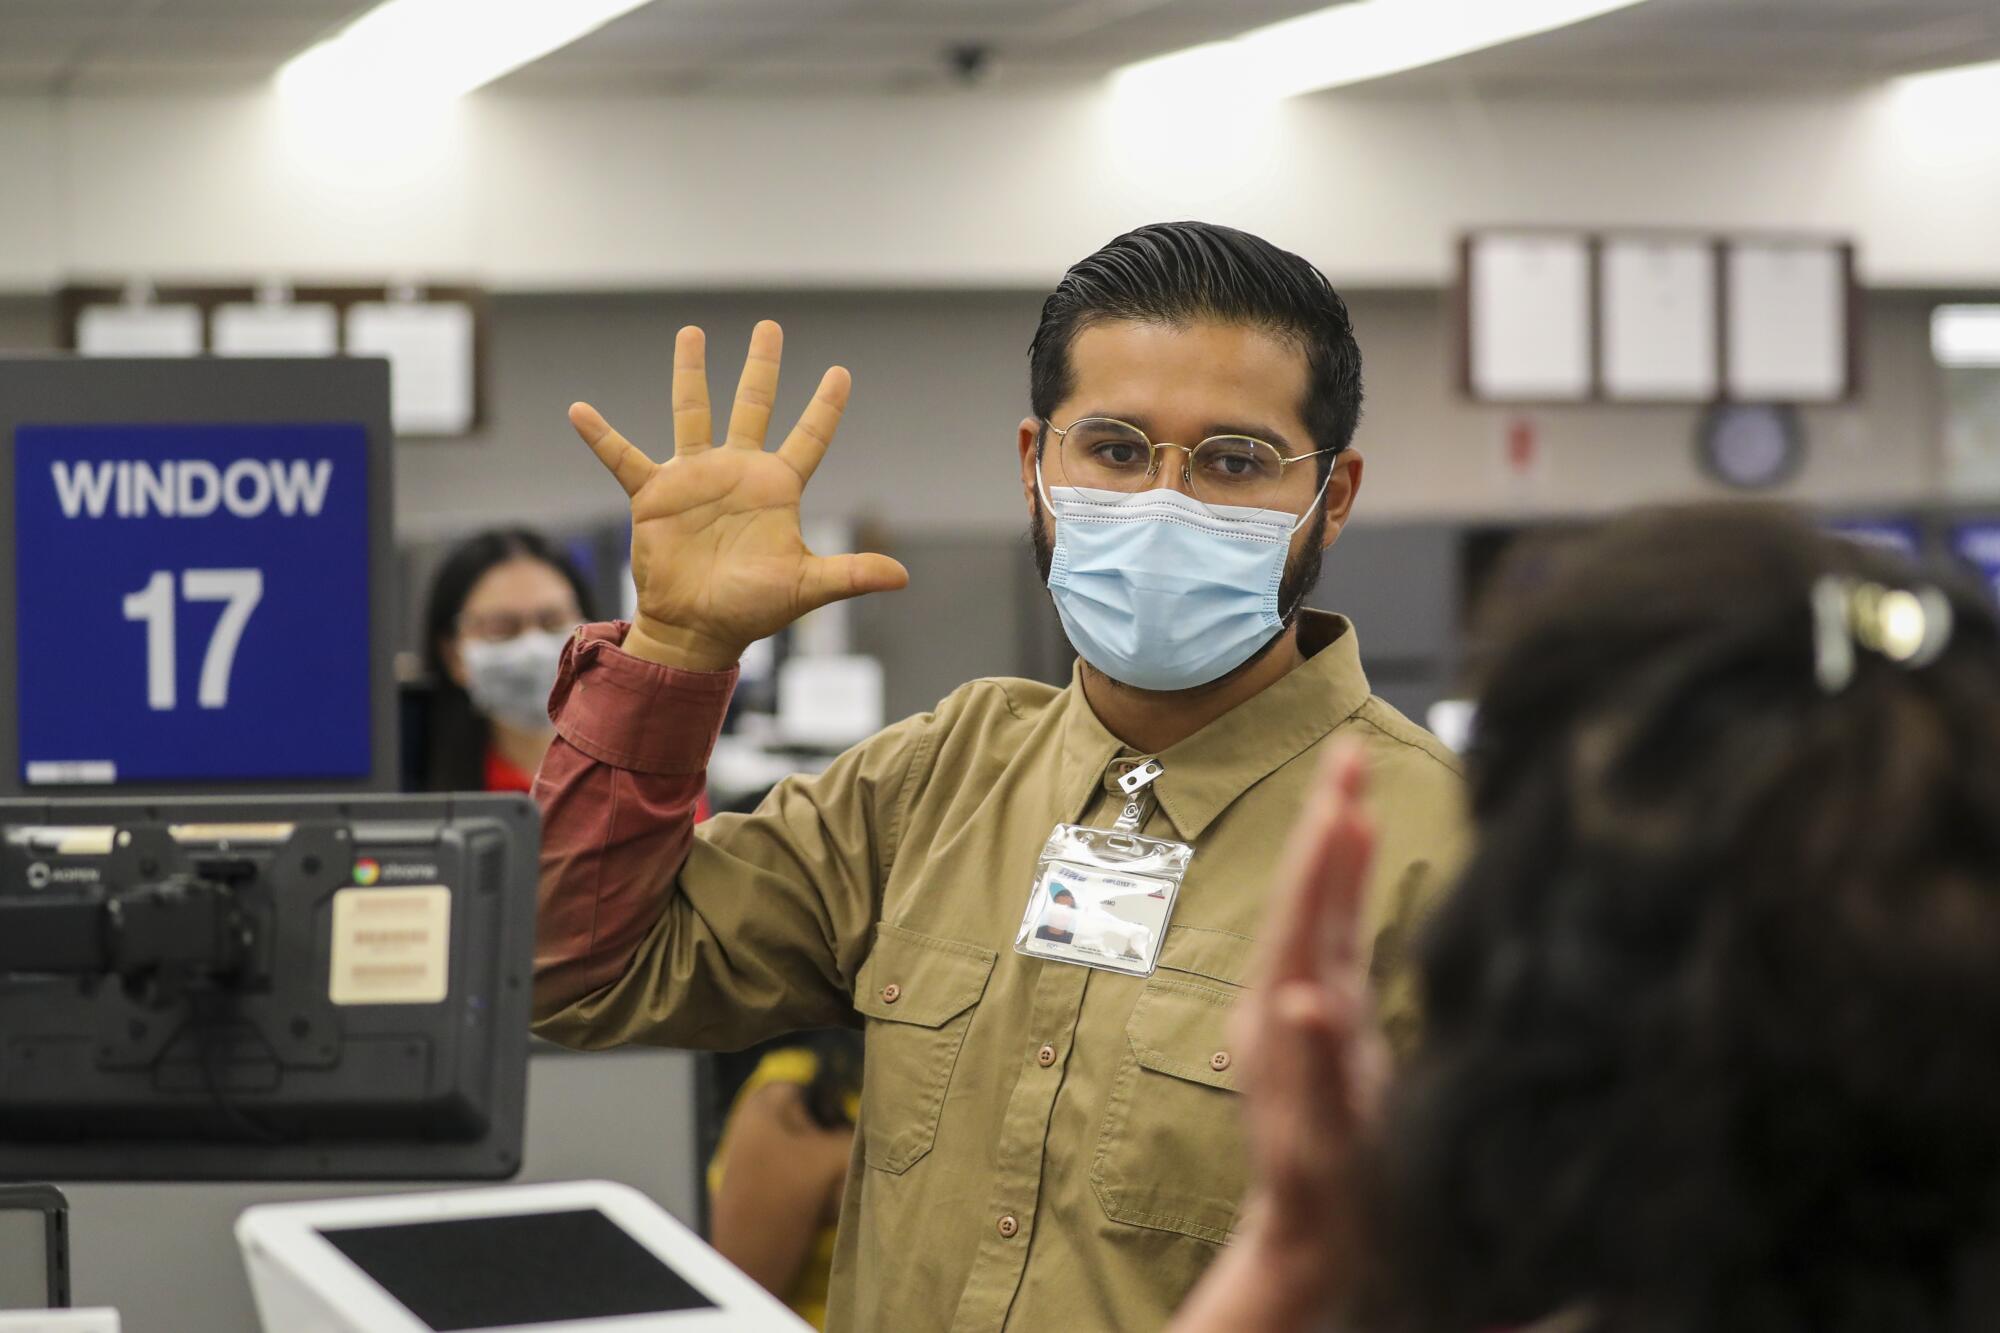 A DMV worker wearing a mask and glasses raises his hand with his fingers spread apart while administering a vision test